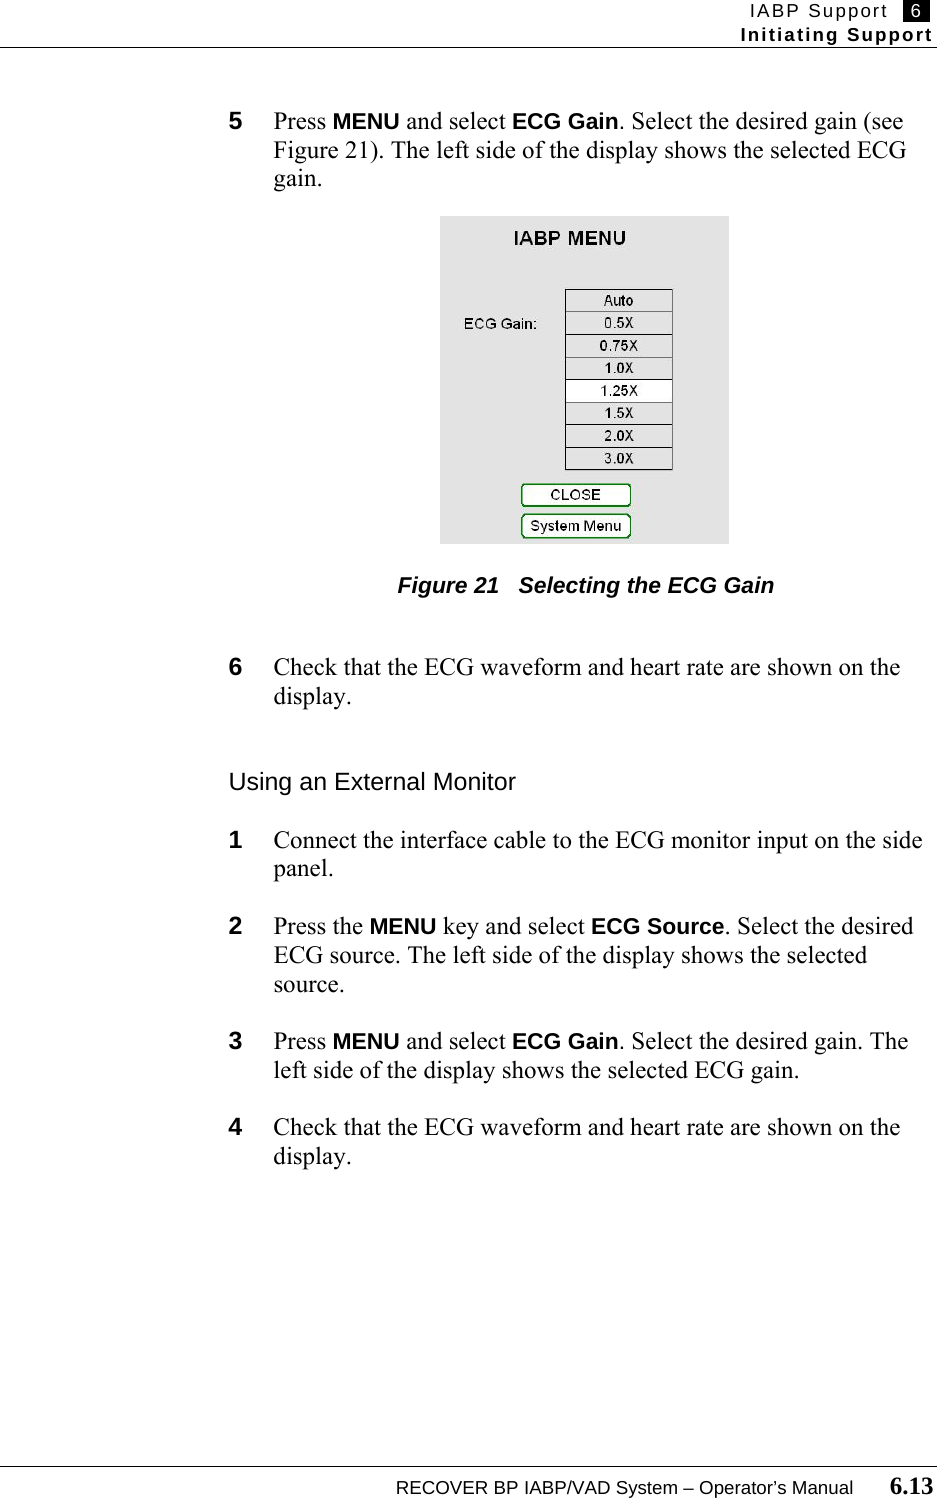 IABP Support   6   Initiating Support  RECOVER BP IABP/VAD System – Operator’s Manual       6.13  5  Press MENU and select ECG Gain. Select the desired gain (see Figure 21). The left side of the display shows the selected ECG gain.                 Figure 21   Selecting the ECG Gain   6  Check that the ECG waveform and heart rate are shown on the display.   Using an External Monitor  1  Connect the interface cable to the ECG monitor input on the side panel.  2  Press the MENU key and select ECG Source. Select the desired ECG source. The left side of the display shows the selected source.  3  Press MENU and select ECG Gain. Select the desired gain. The left side of the display shows the selected ECG gain.  4  Check that the ECG waveform and heart rate are shown on the display.   